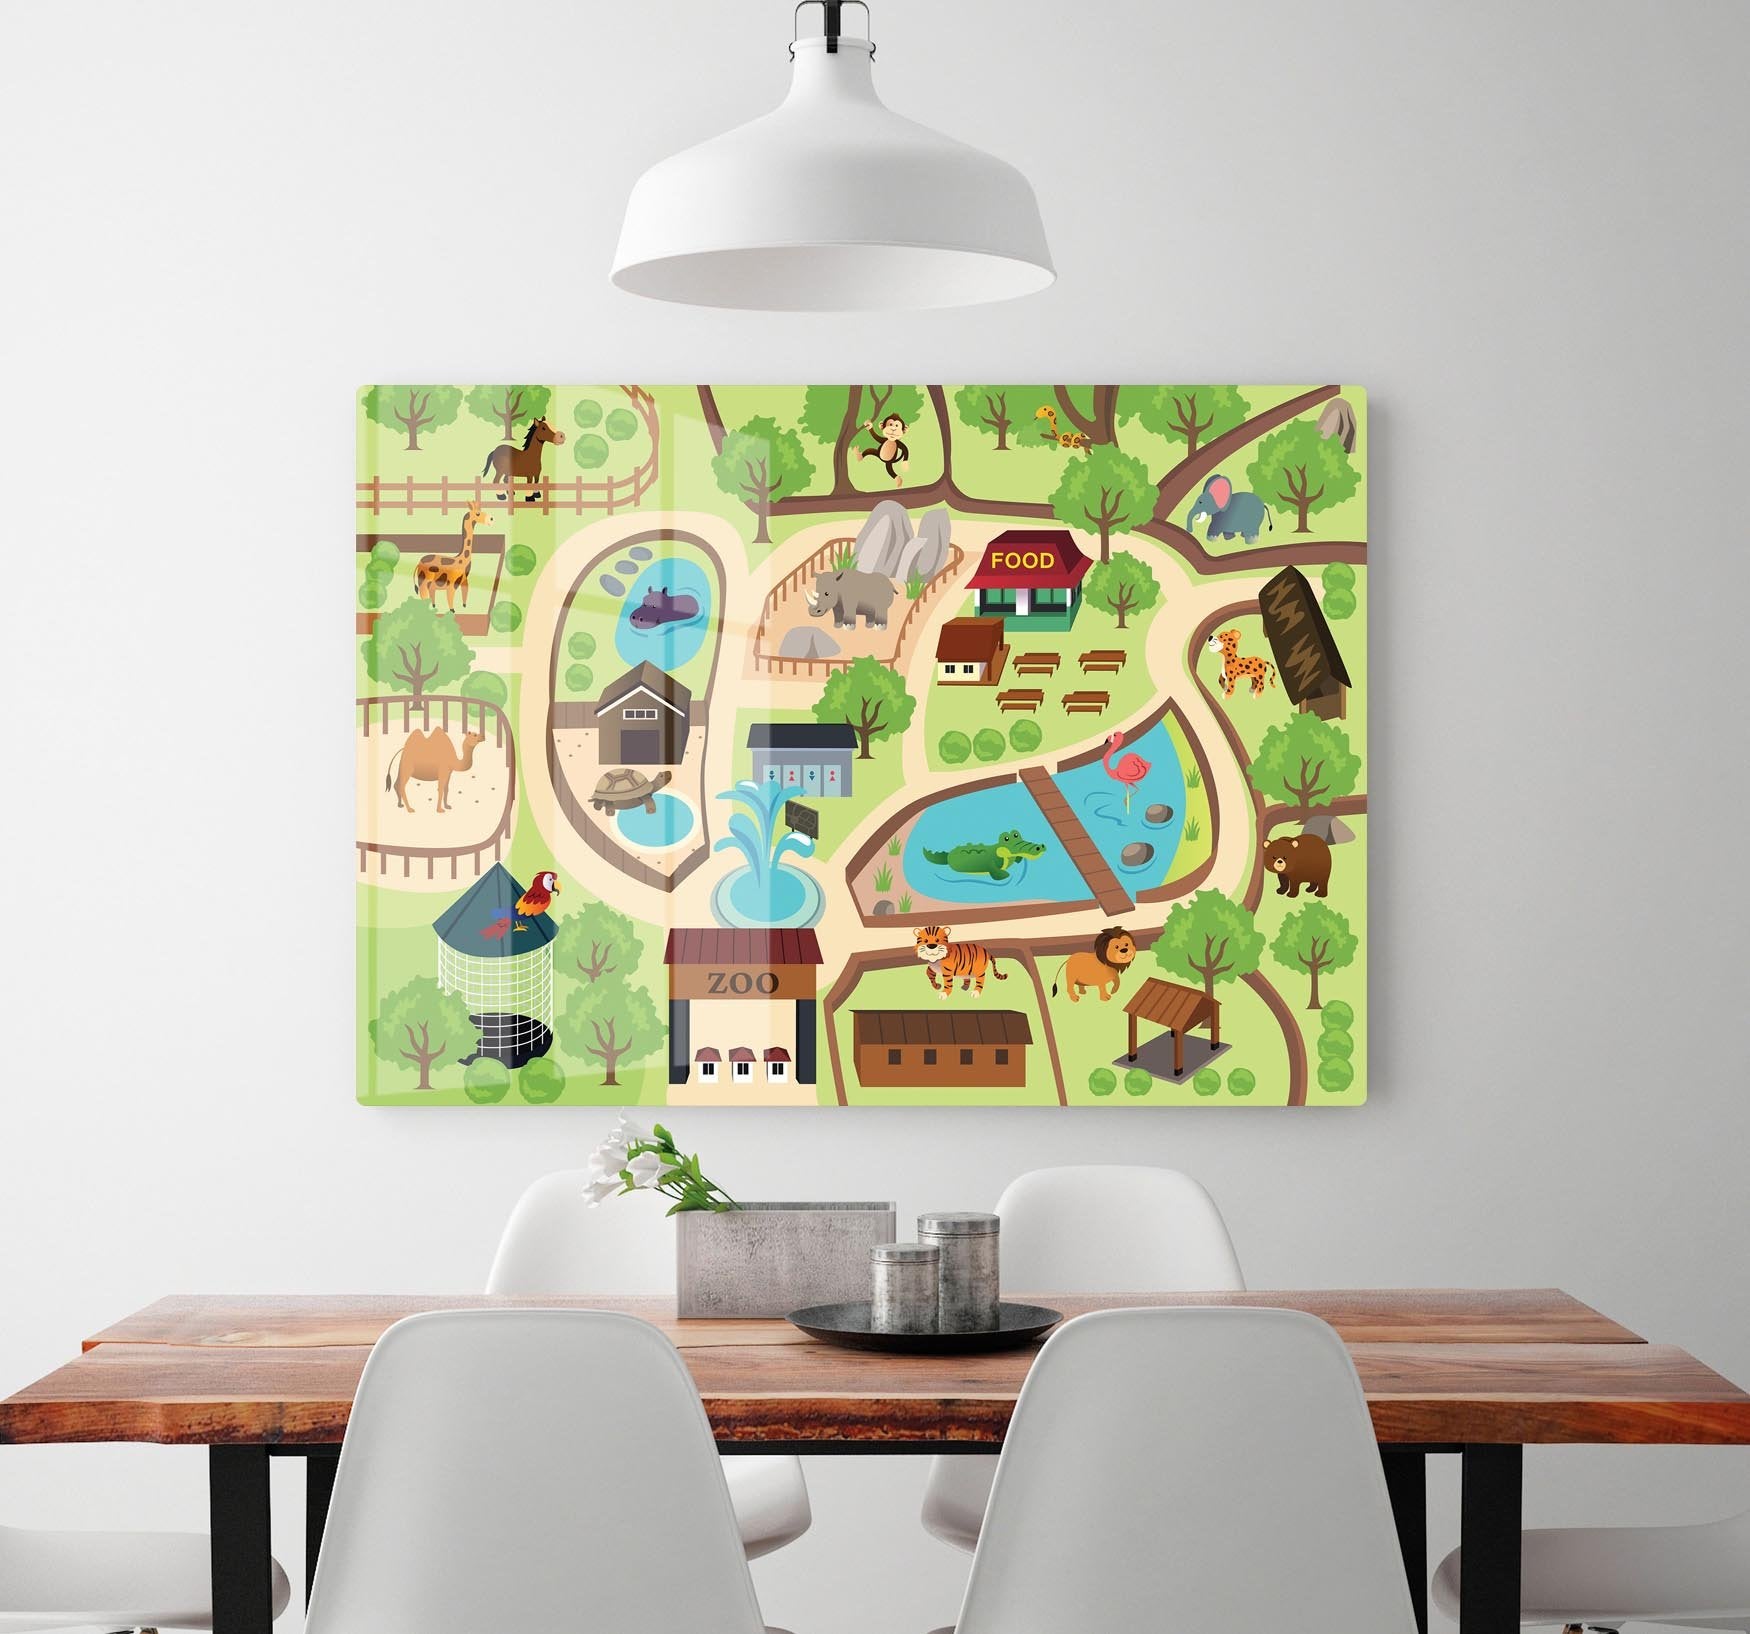 illustration of map of a zoo park HD Metal Print